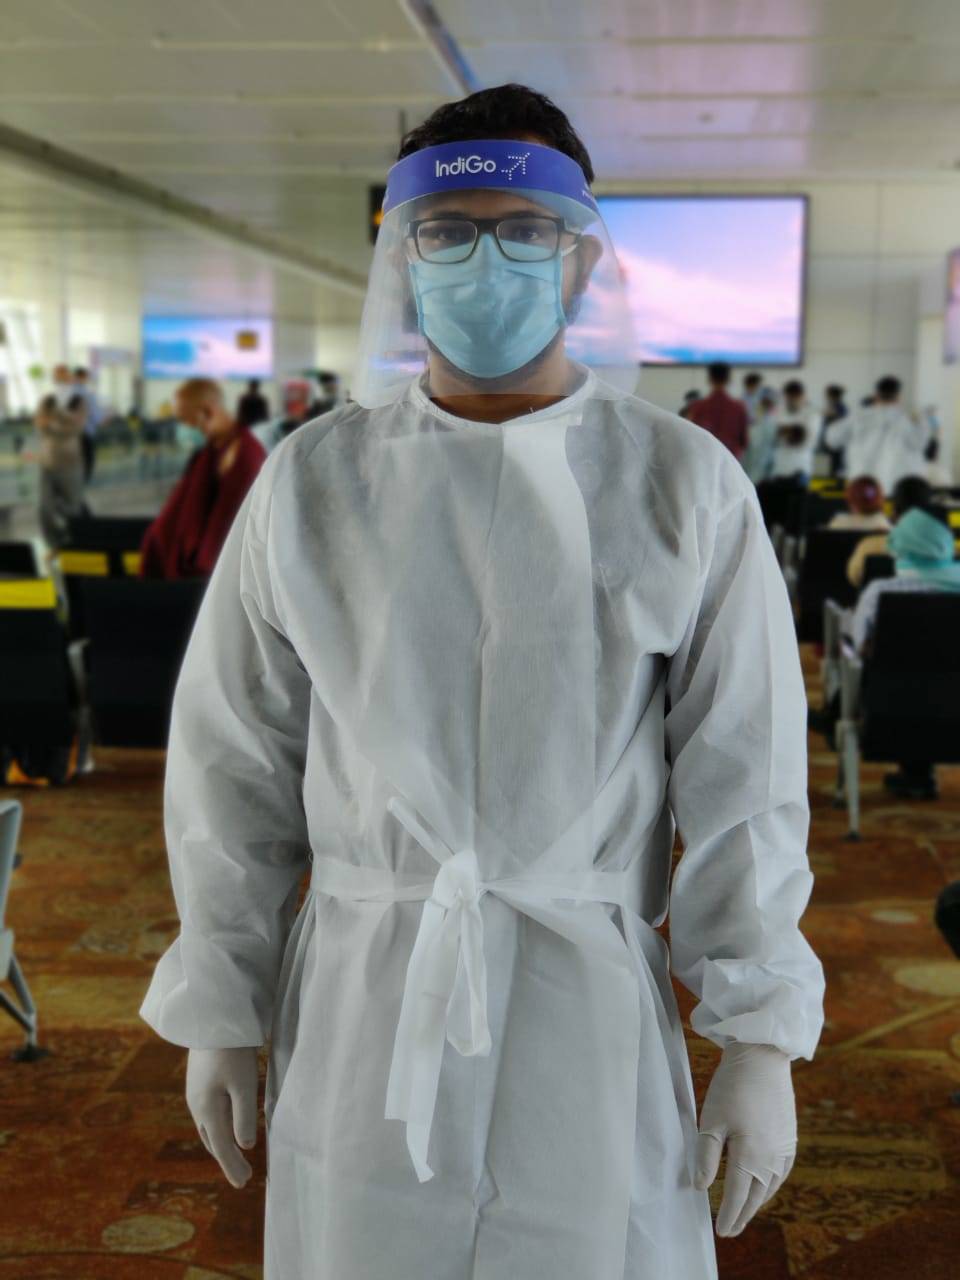 A middle seat passenger wearing the PPE kit